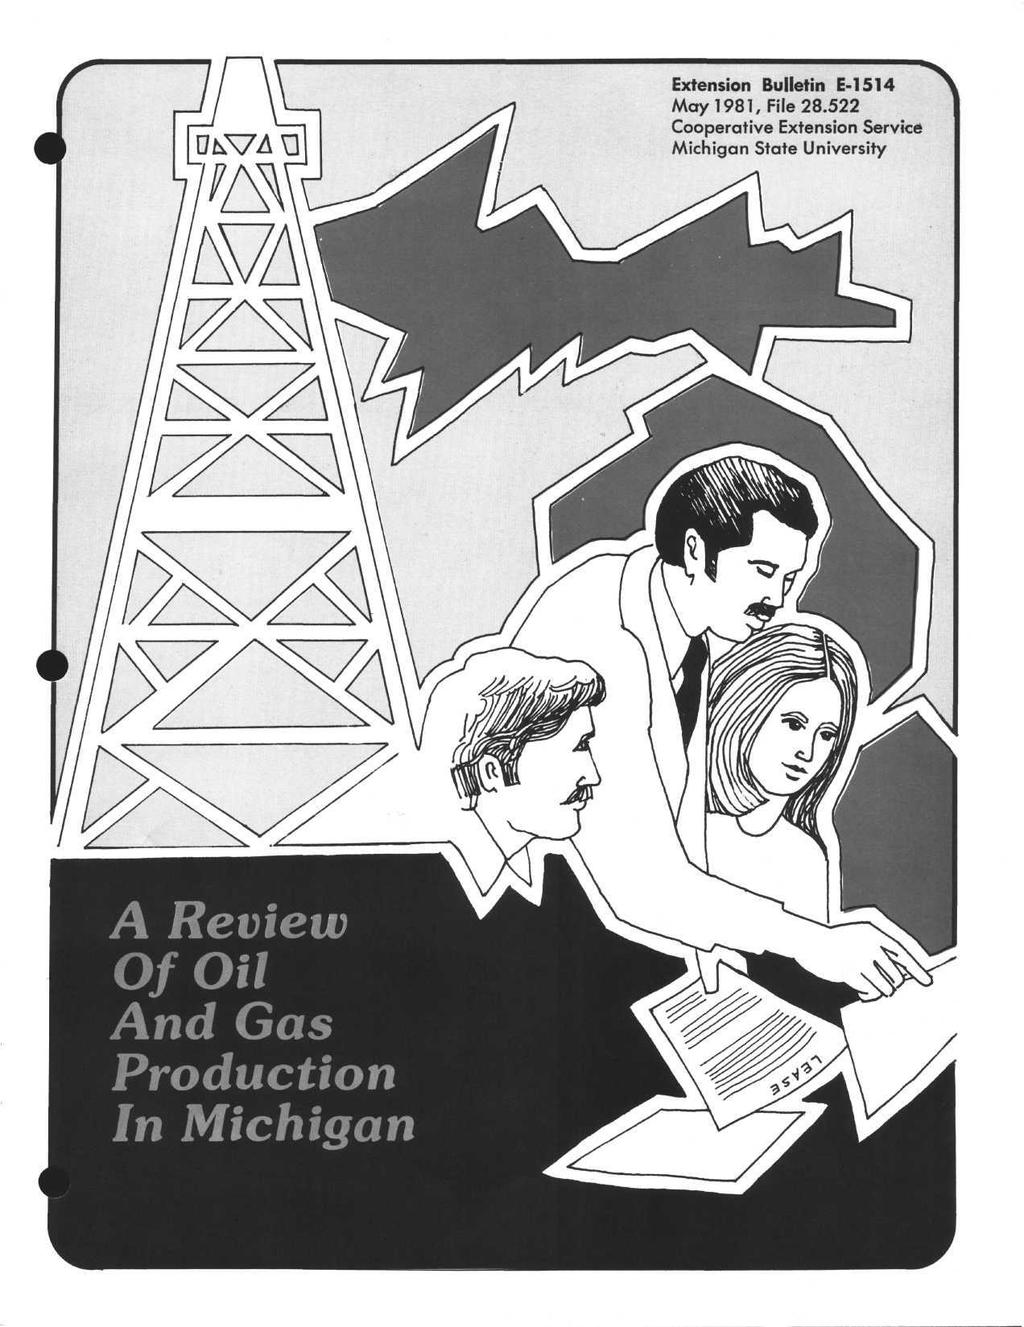 A Review Of Oil And Gas Production In Michigan Extension Bulletin E-1514